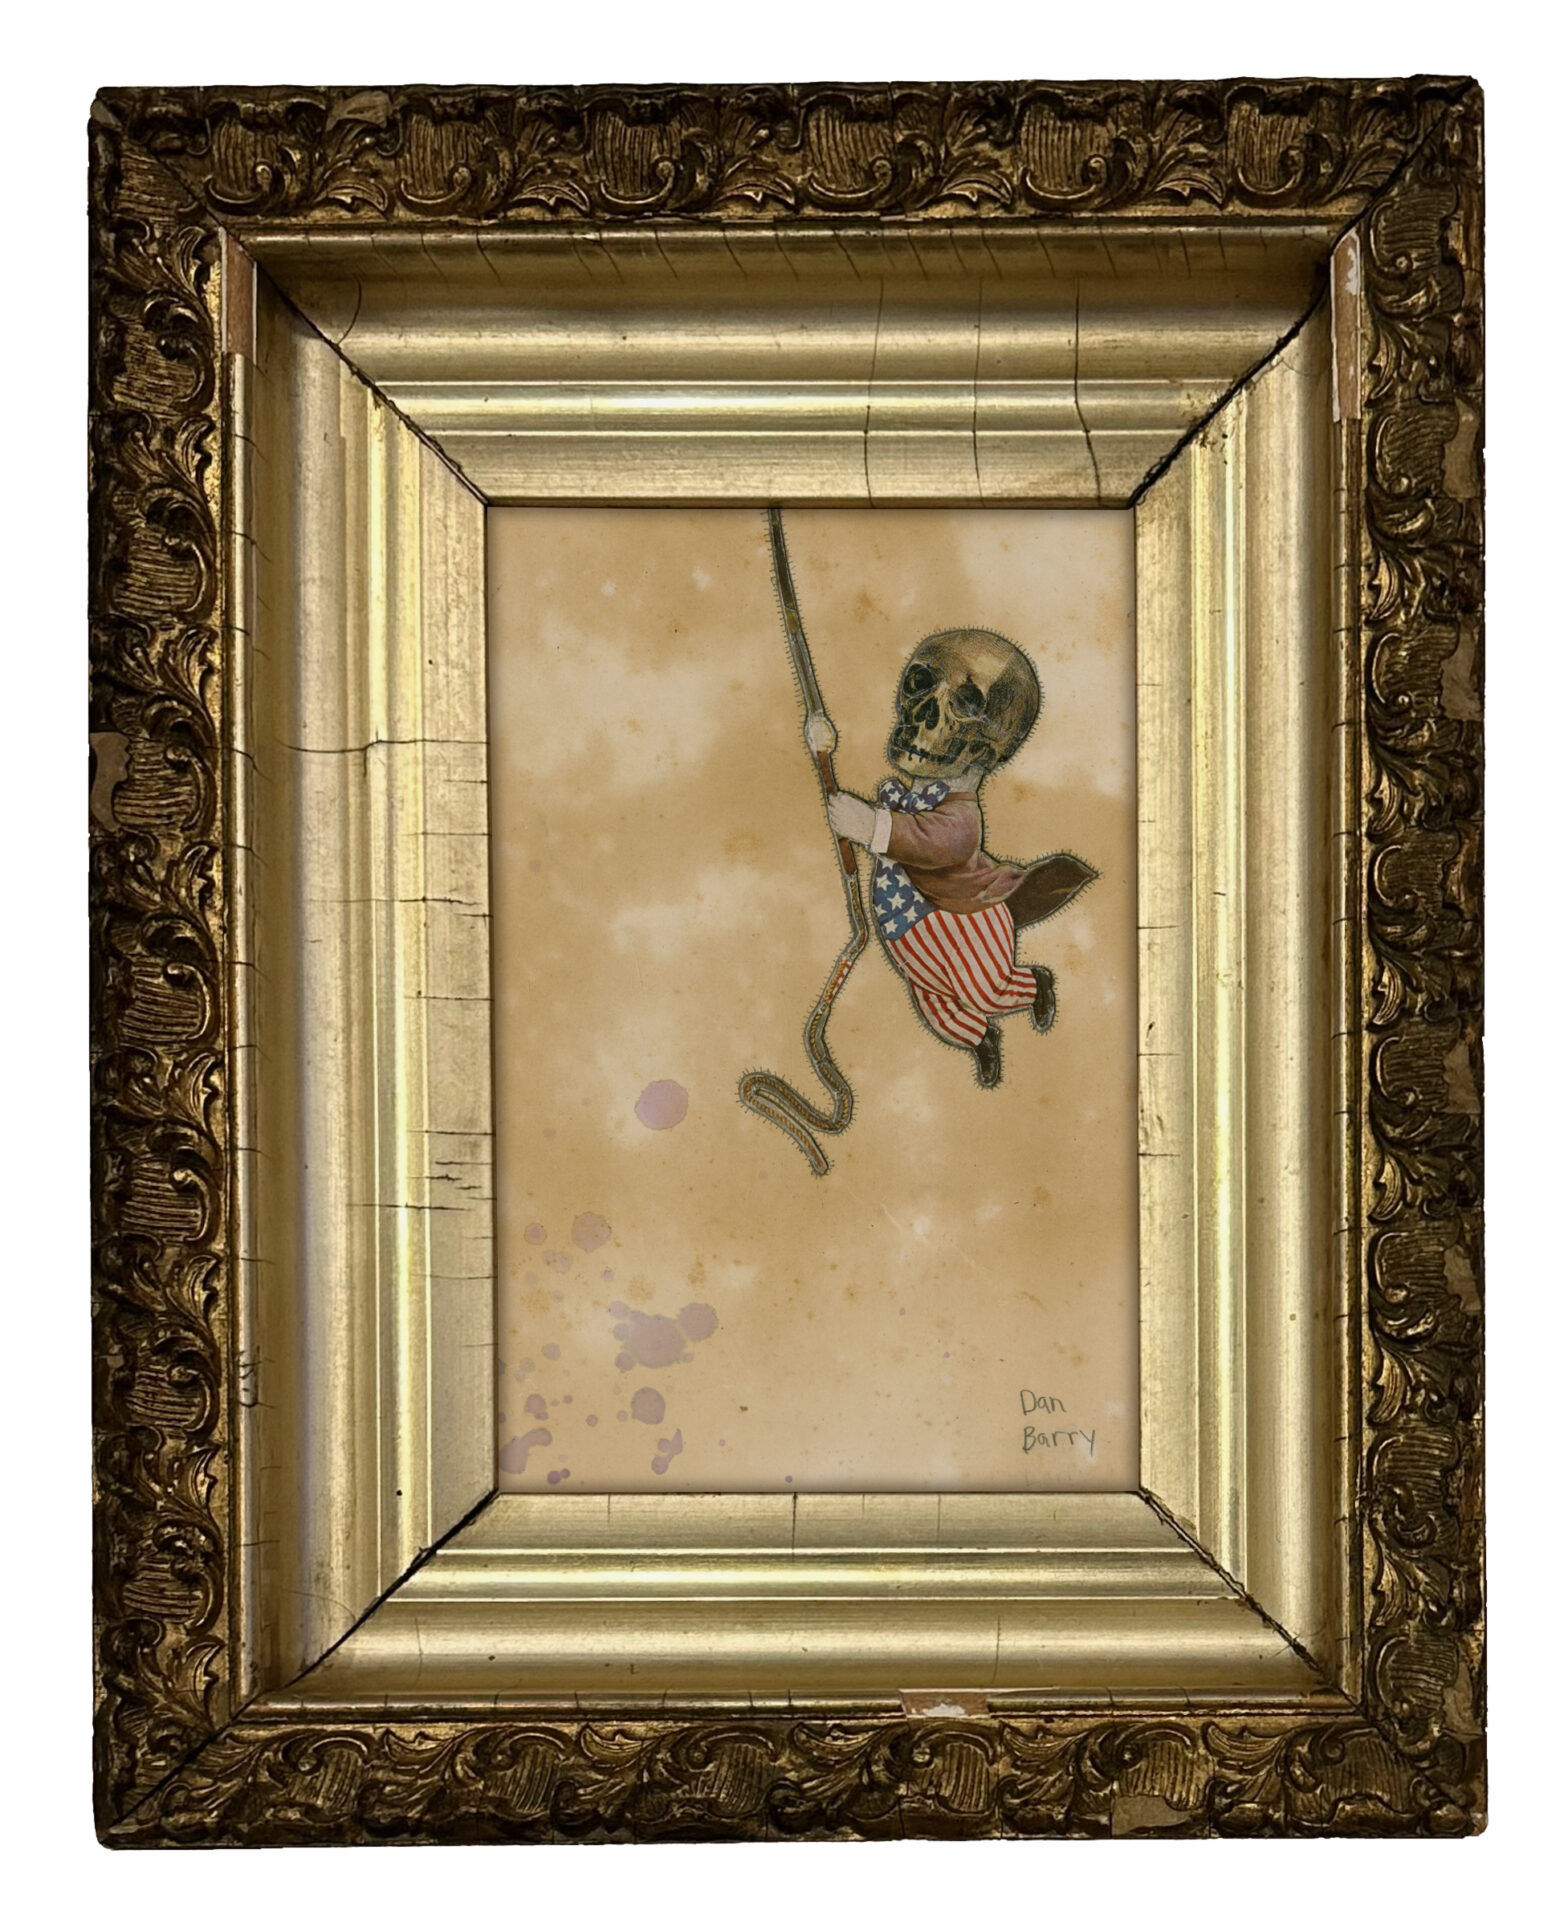 collage by dan barry of a skeleton dressed as uncle same hanging with his hands from a rope on a blank tan background, artwork is framed